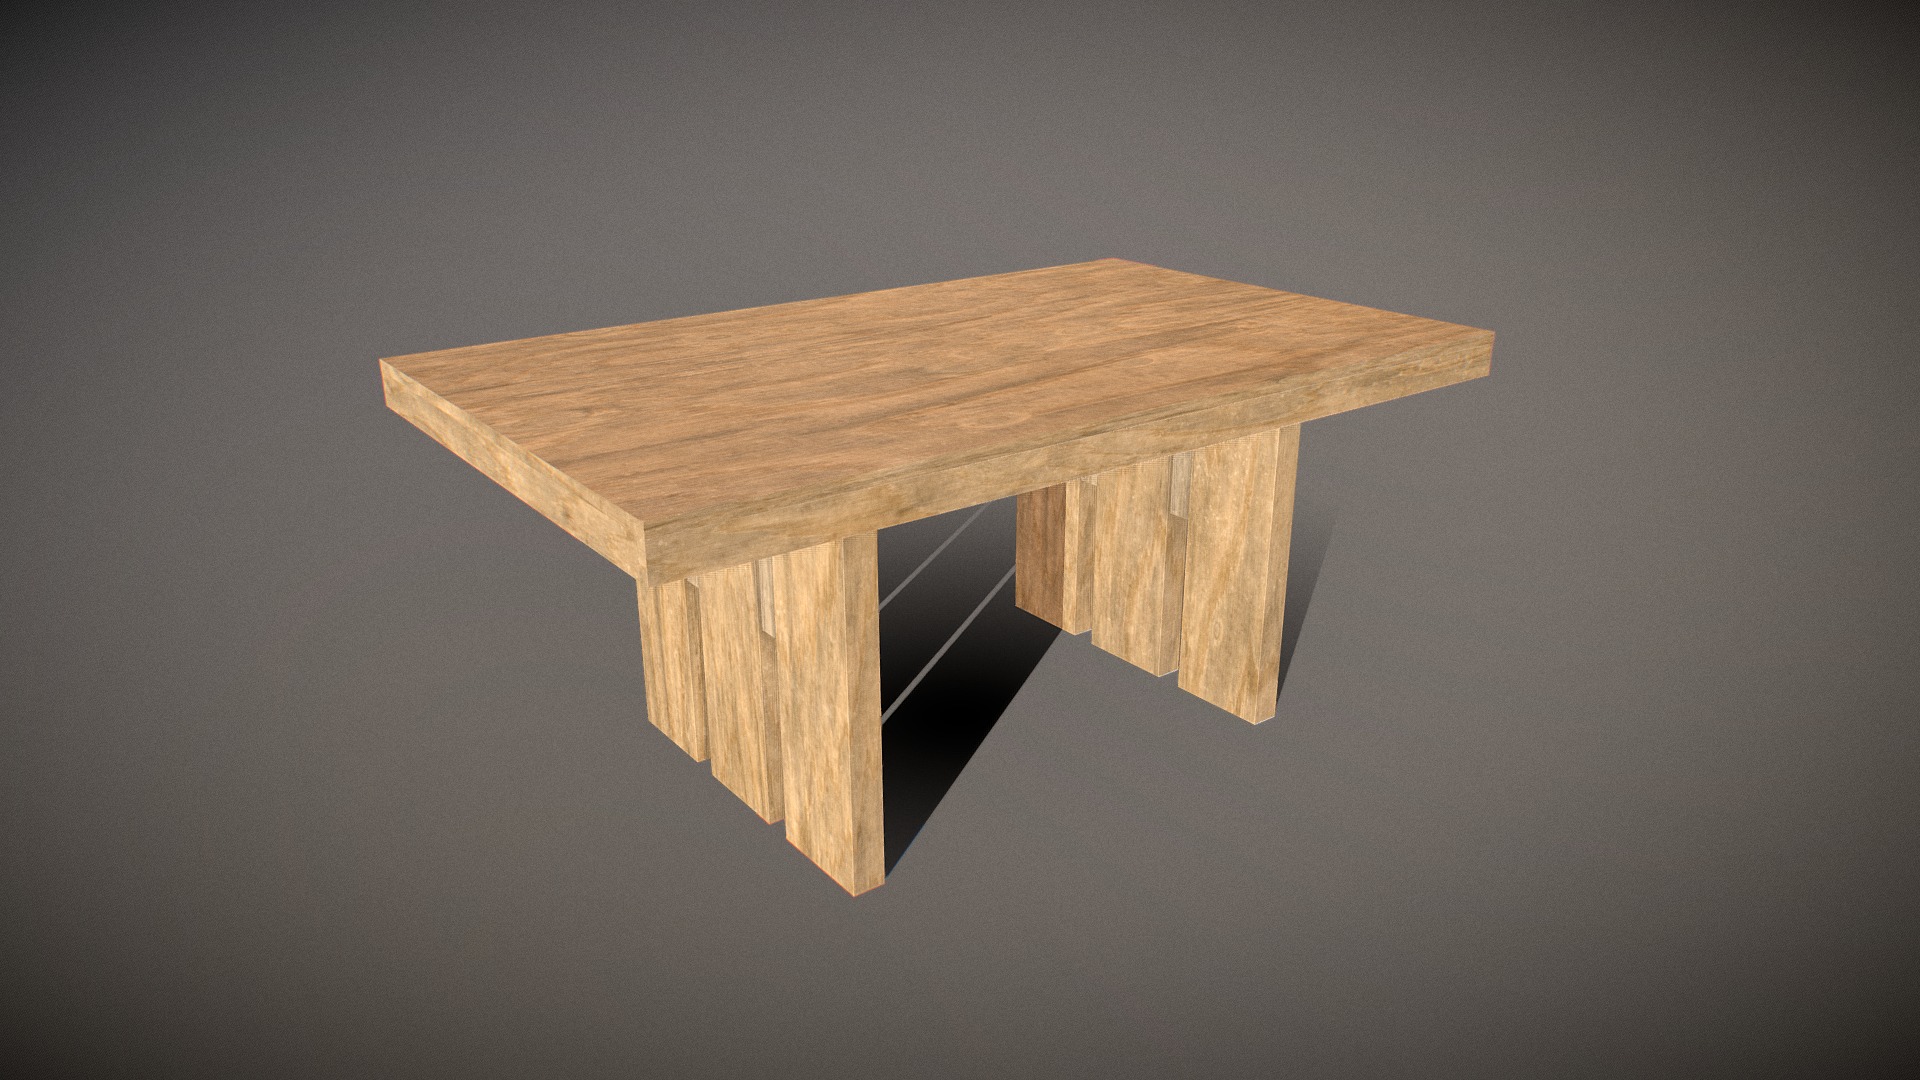 3D model Table wooden 04 - This is a 3D model of the Table wooden 04. The 3D model is about a wooden table on a grey background.